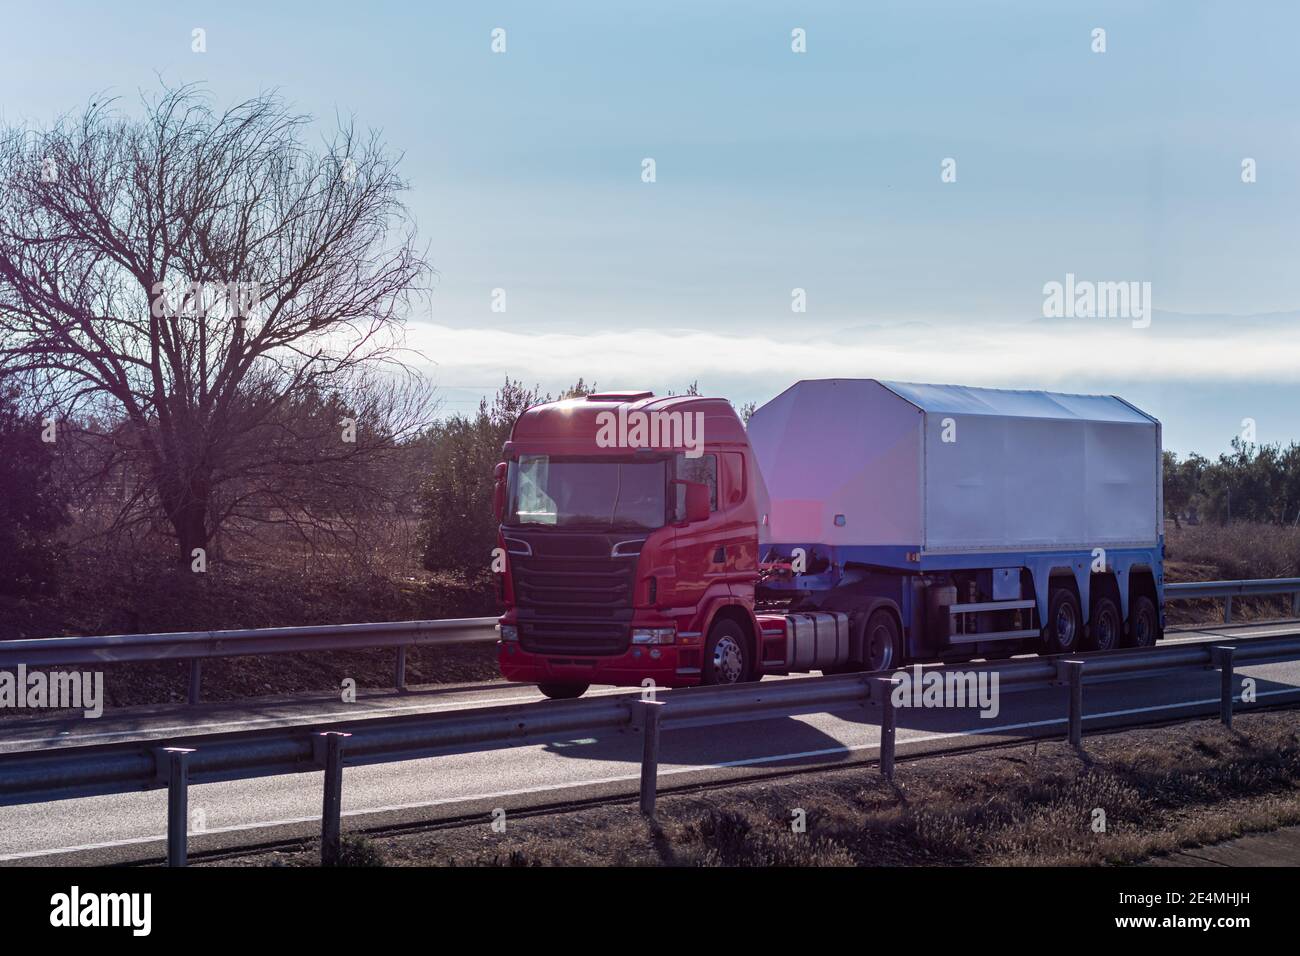 Truck with a specific semi-trailer for transporting glass and glass while driving on the highway. Stock Photo